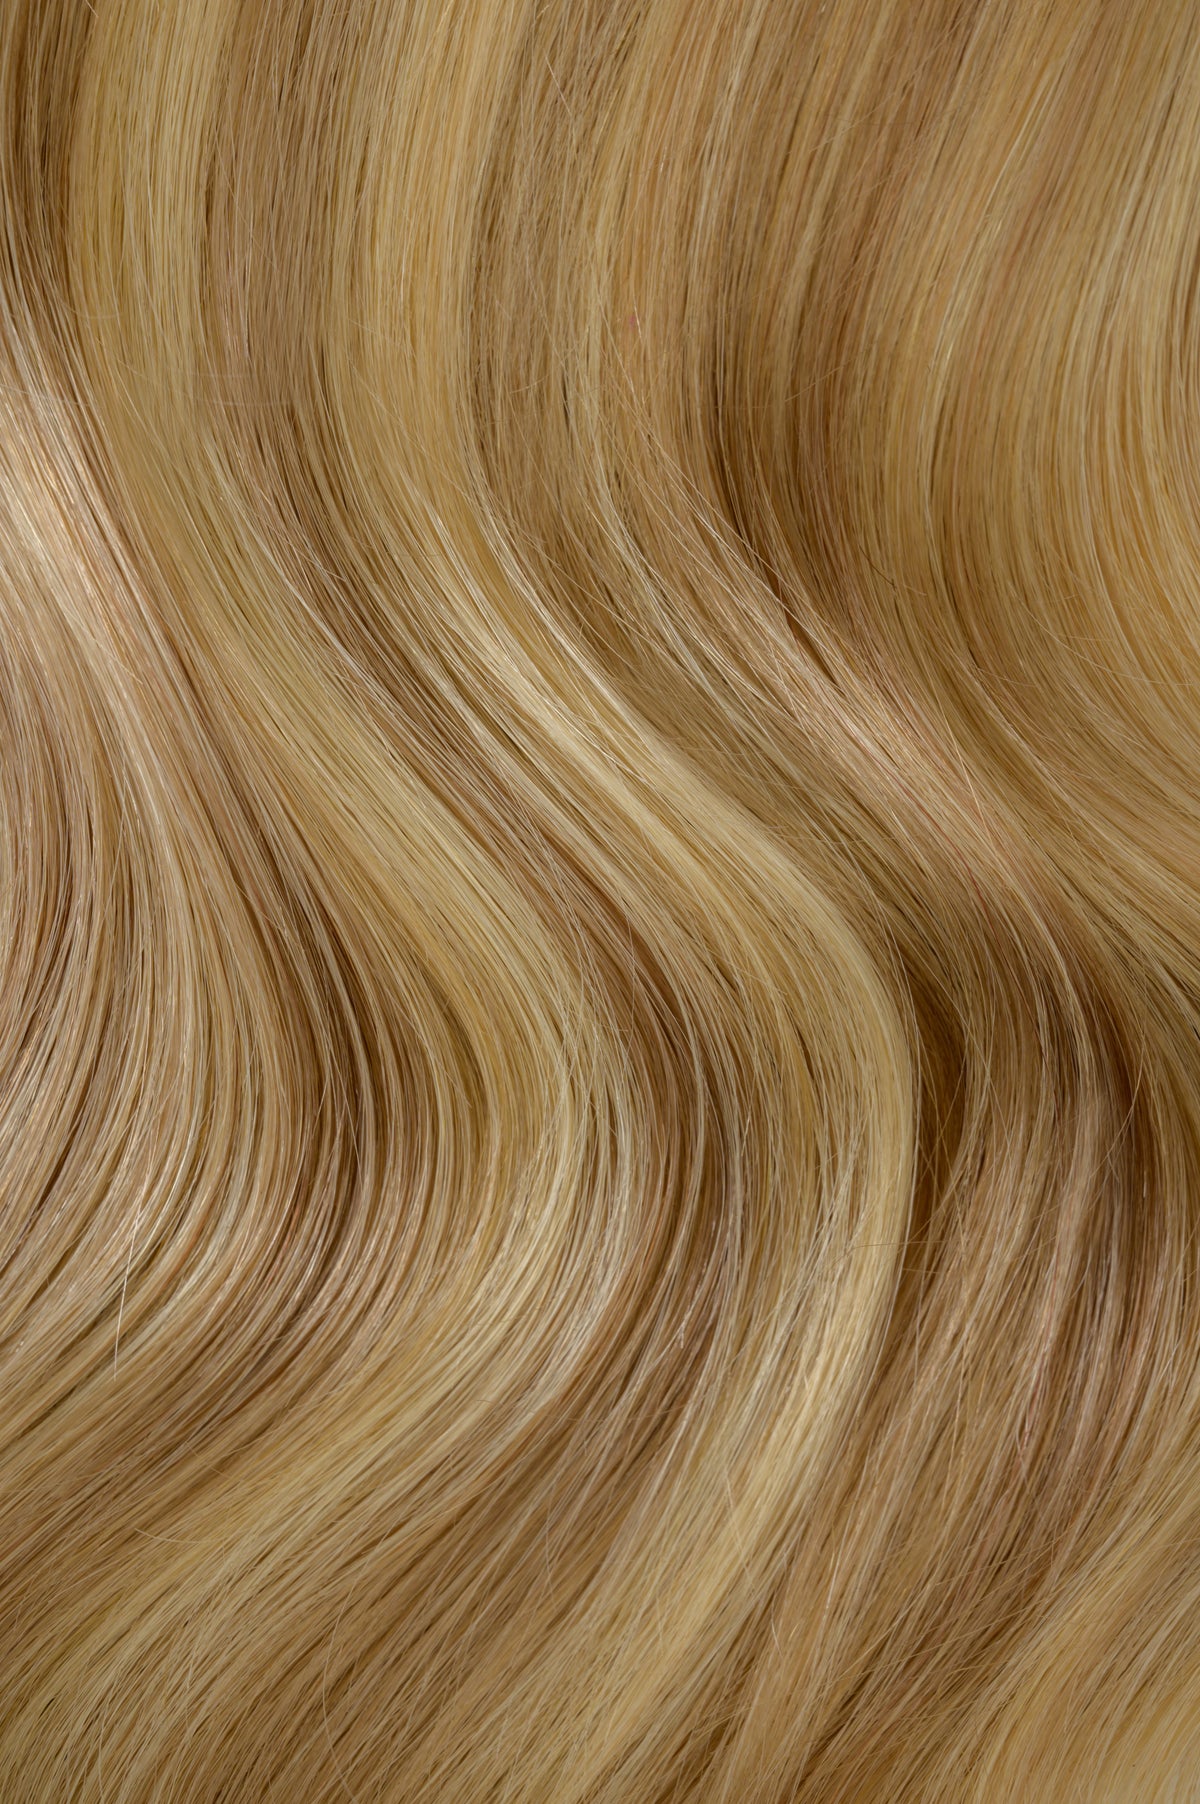 #16/22 Caramel Light Blonde Mix Ultra Seamless Tape In Extensions